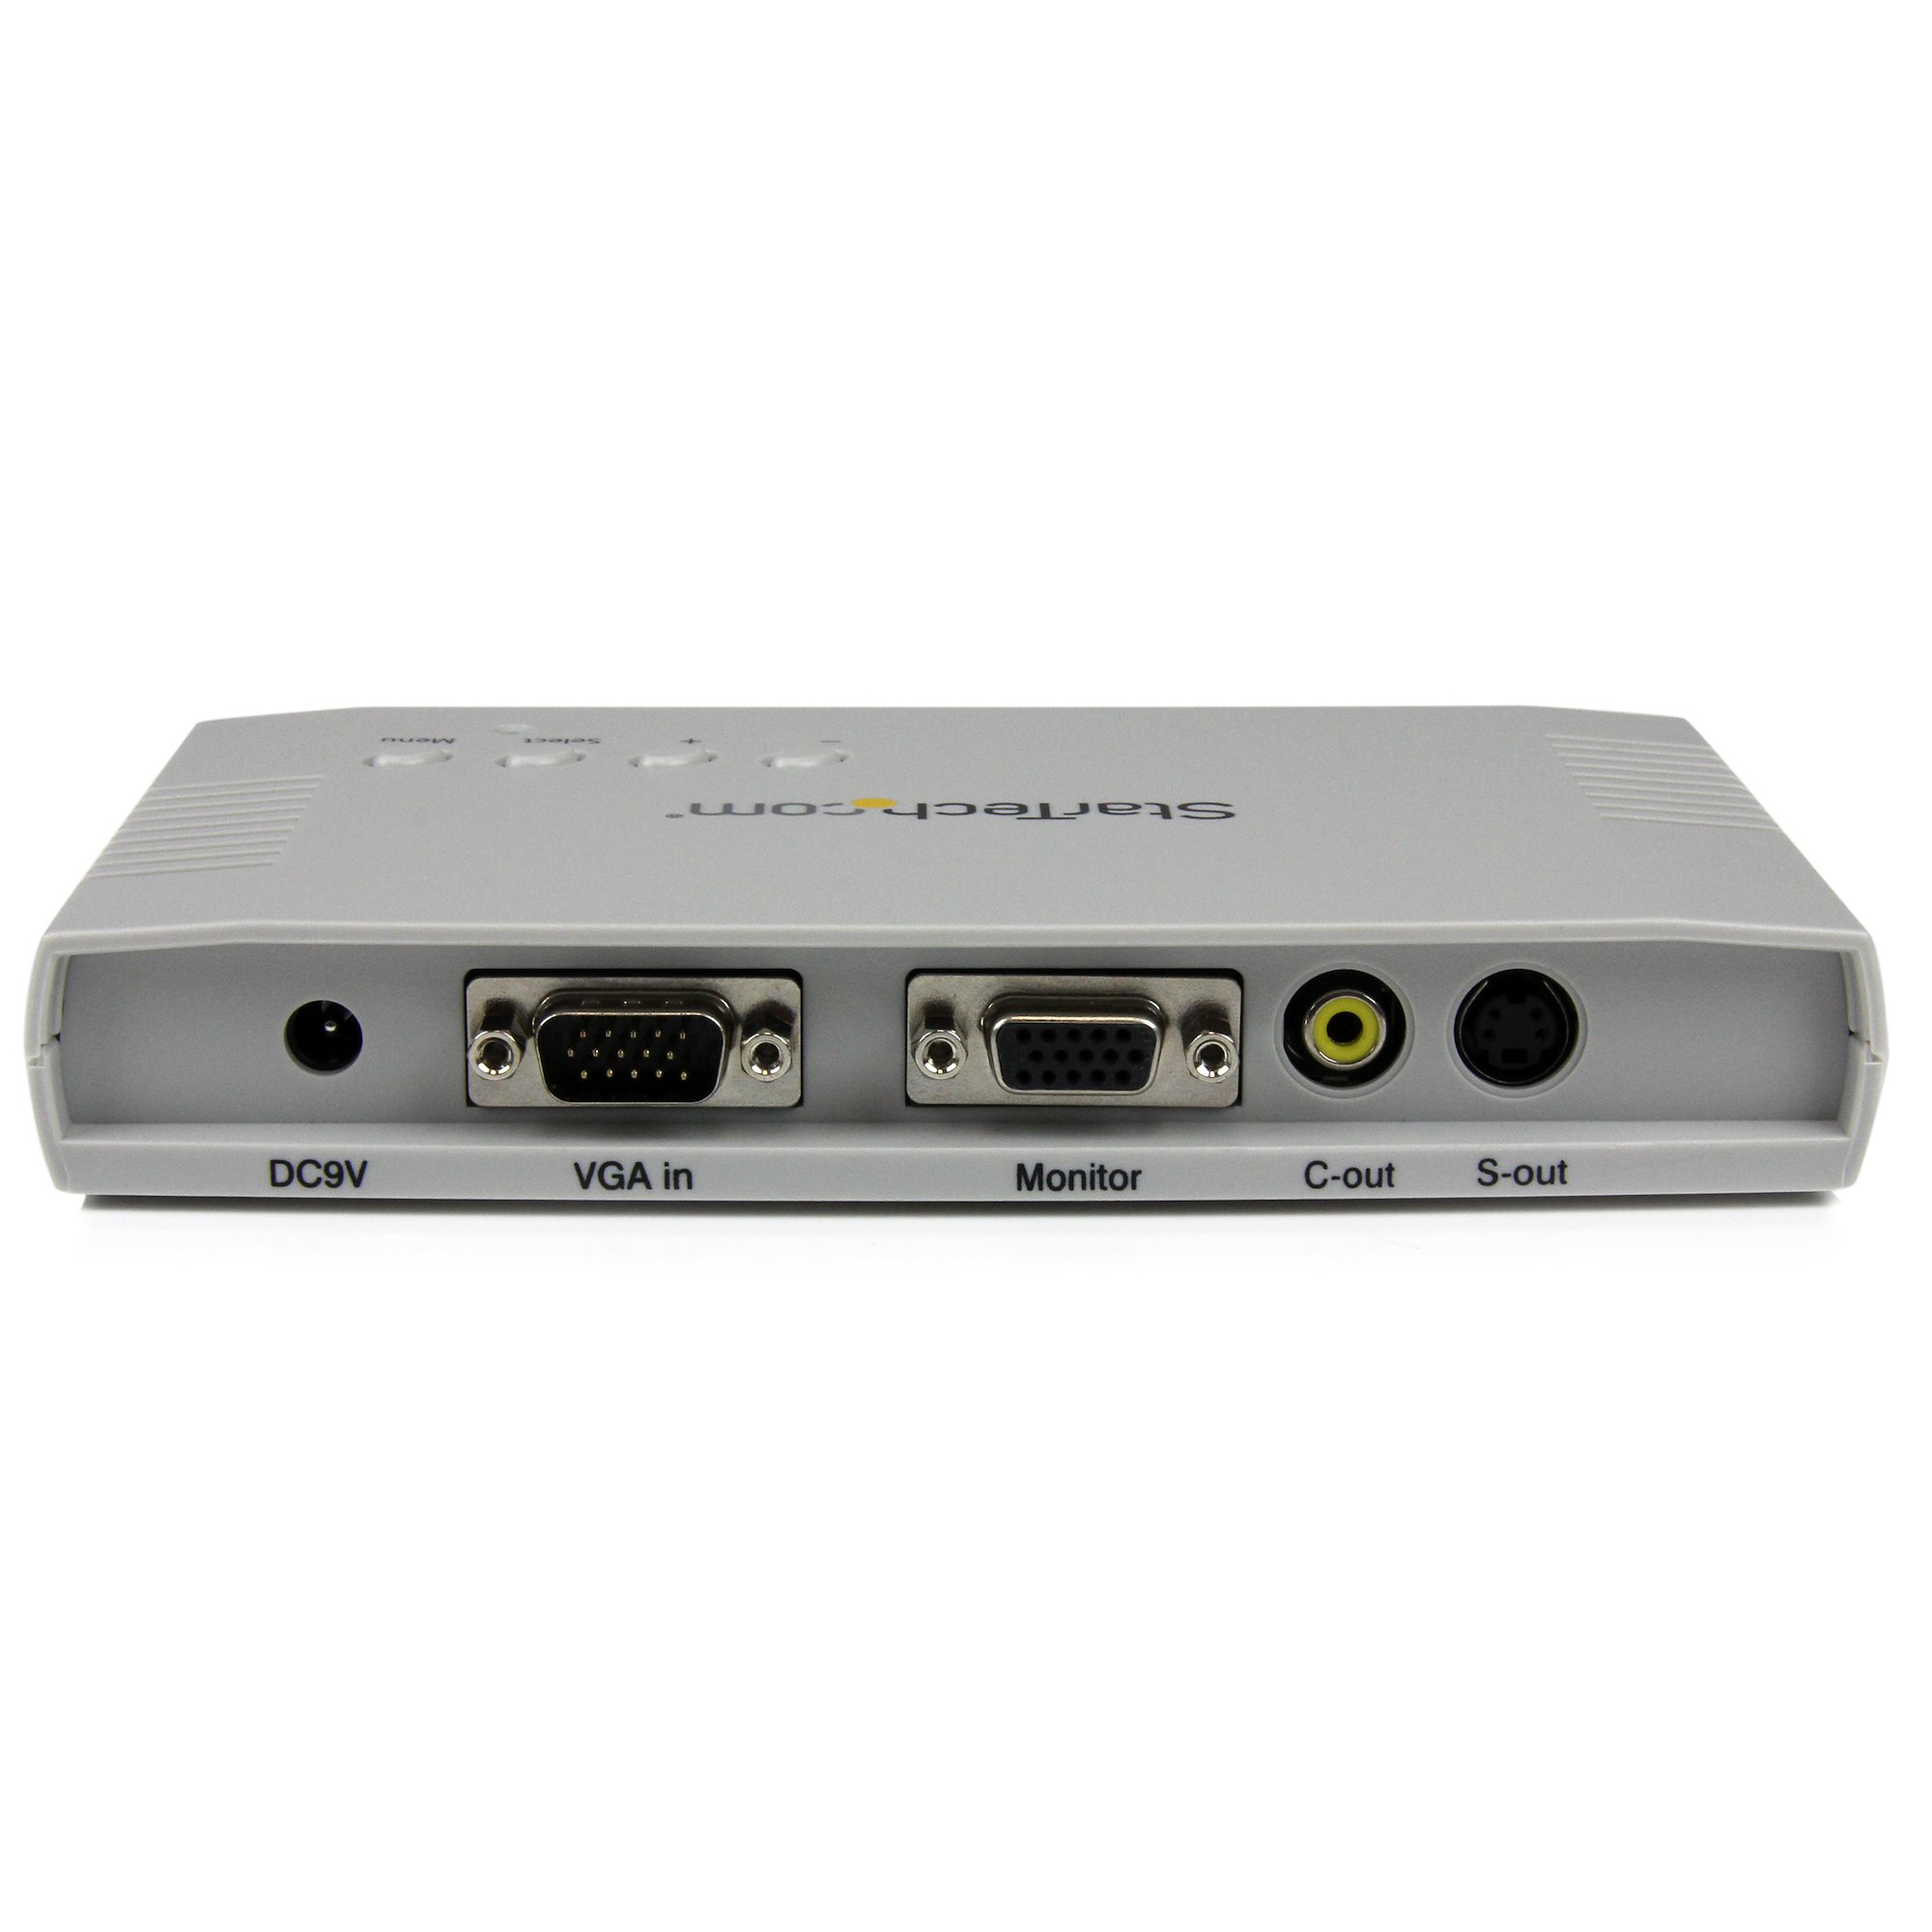 VGA PC to TV Video Converter with Remote - Video Converters